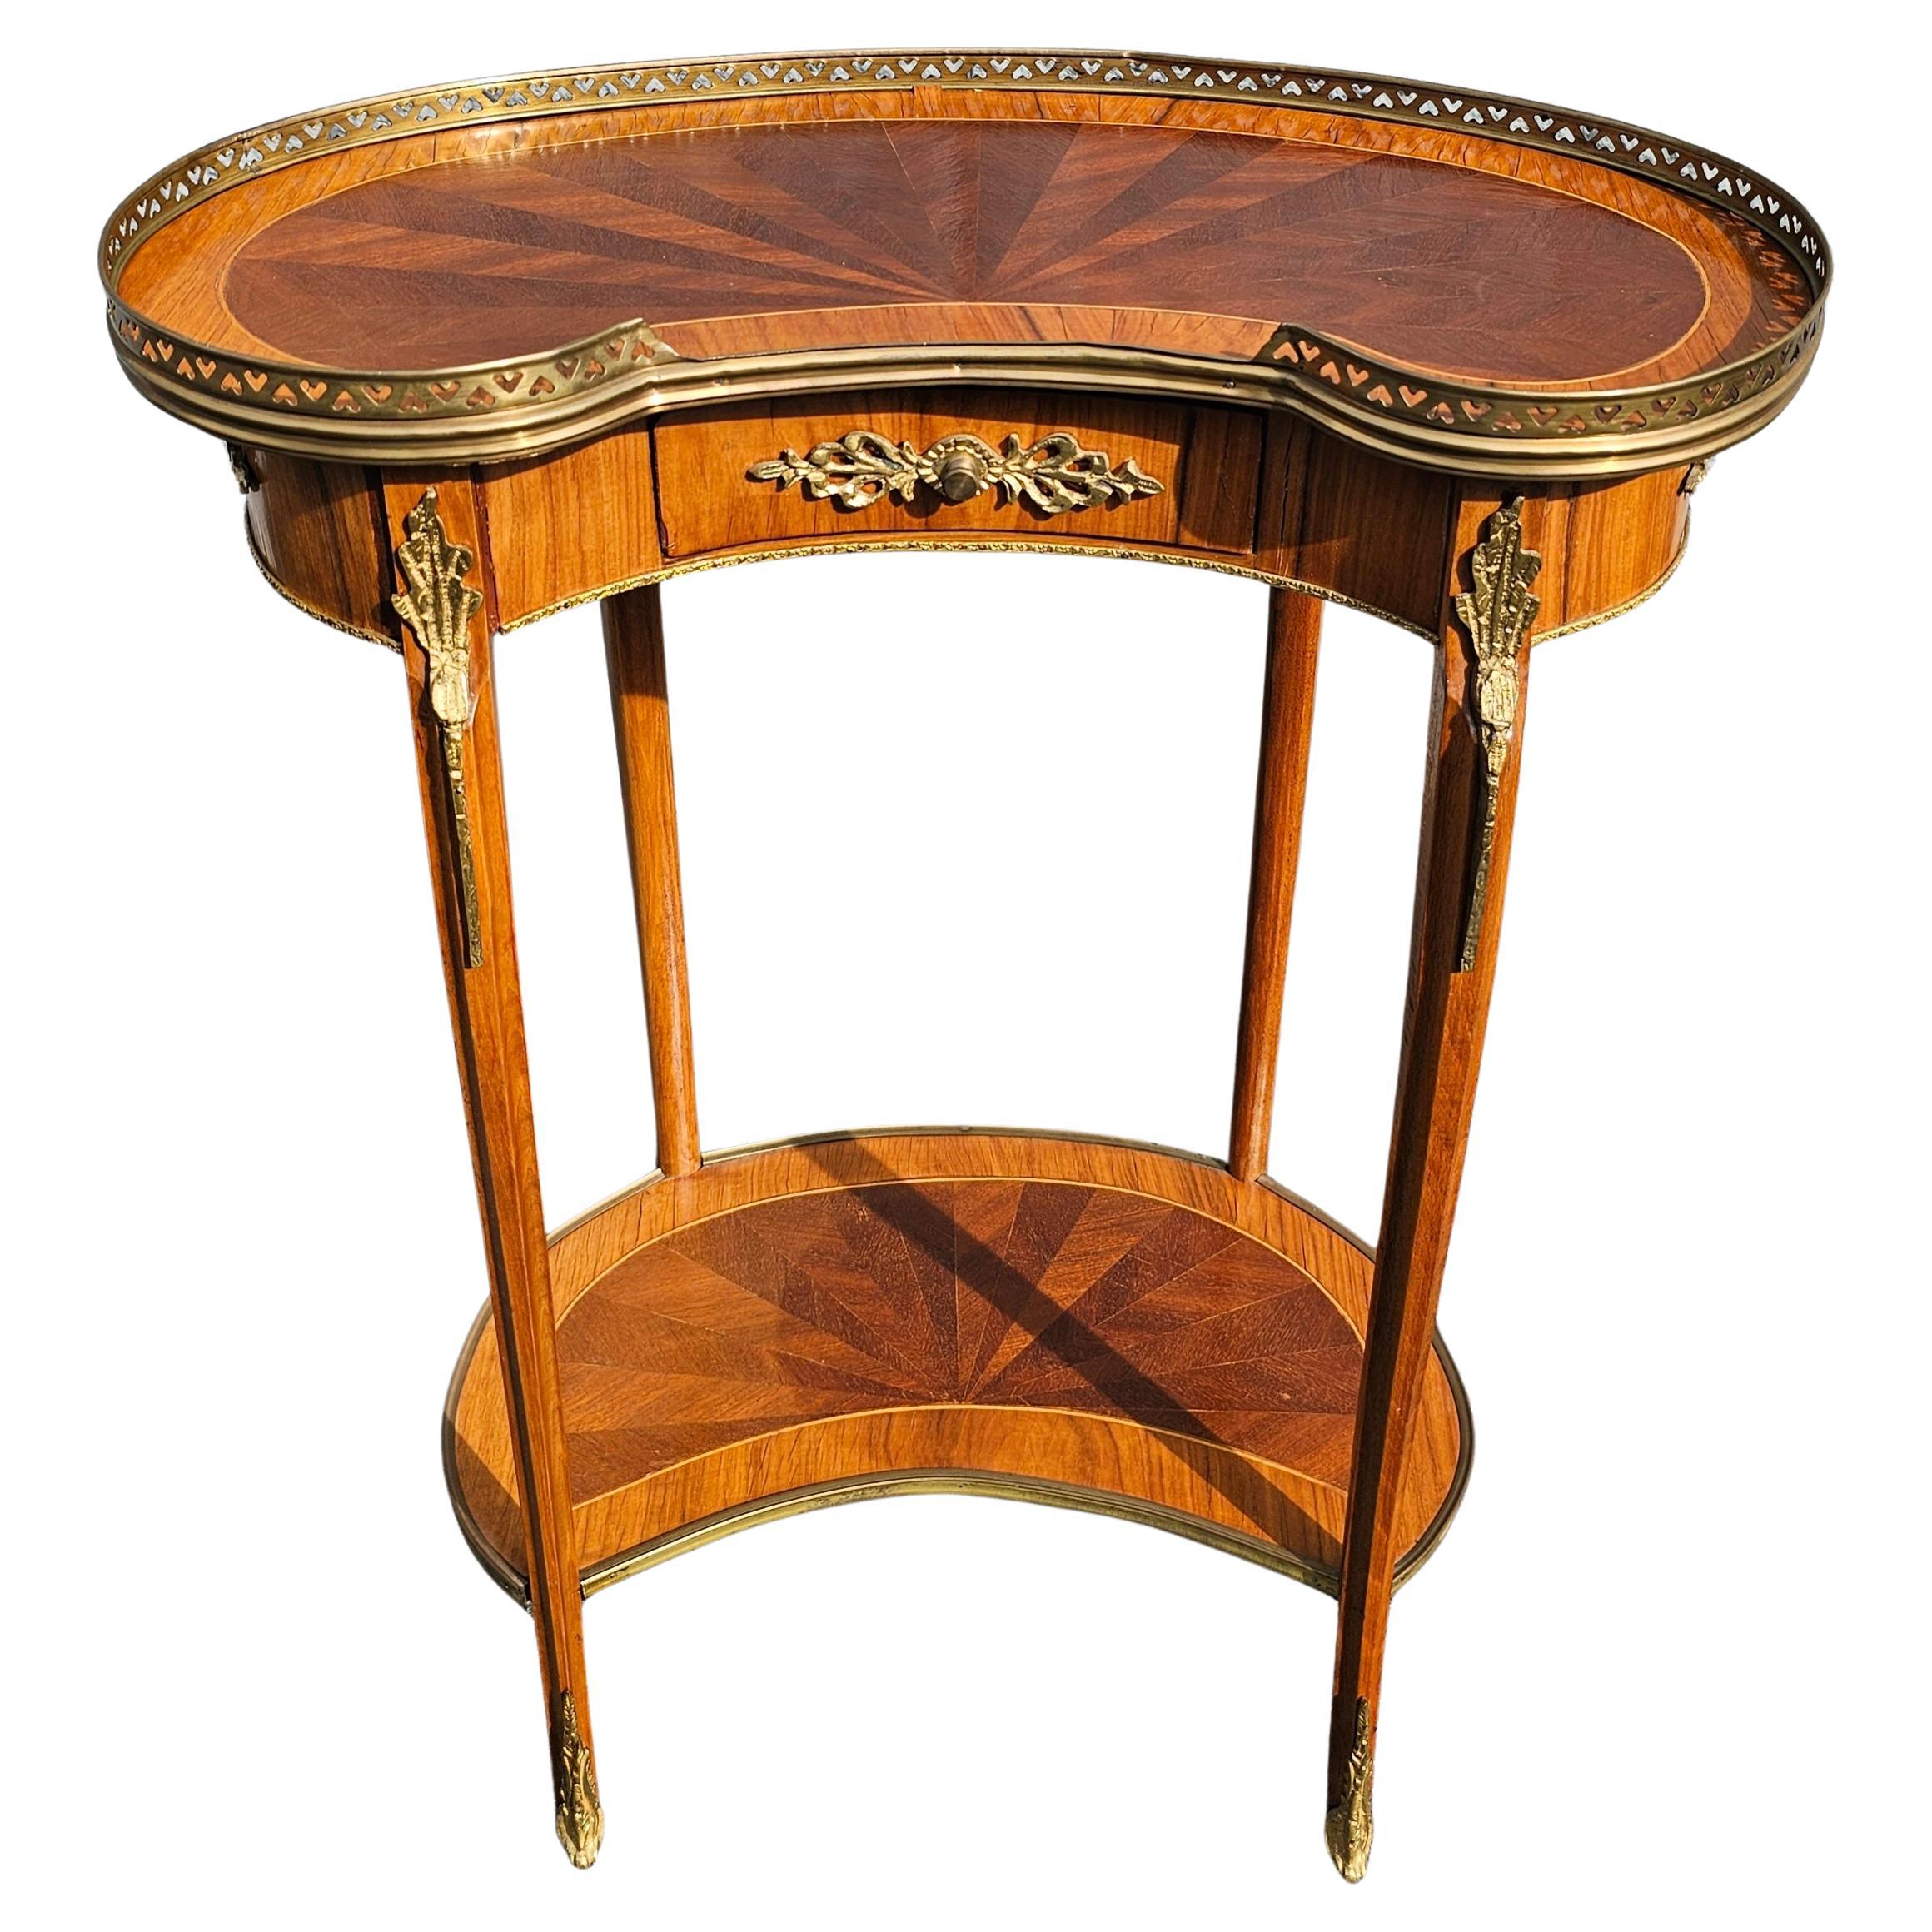 Pair Louis XV Ormolu Mounted Galleried Tulipwood And Kingwood Table Ambulante For Sale 5